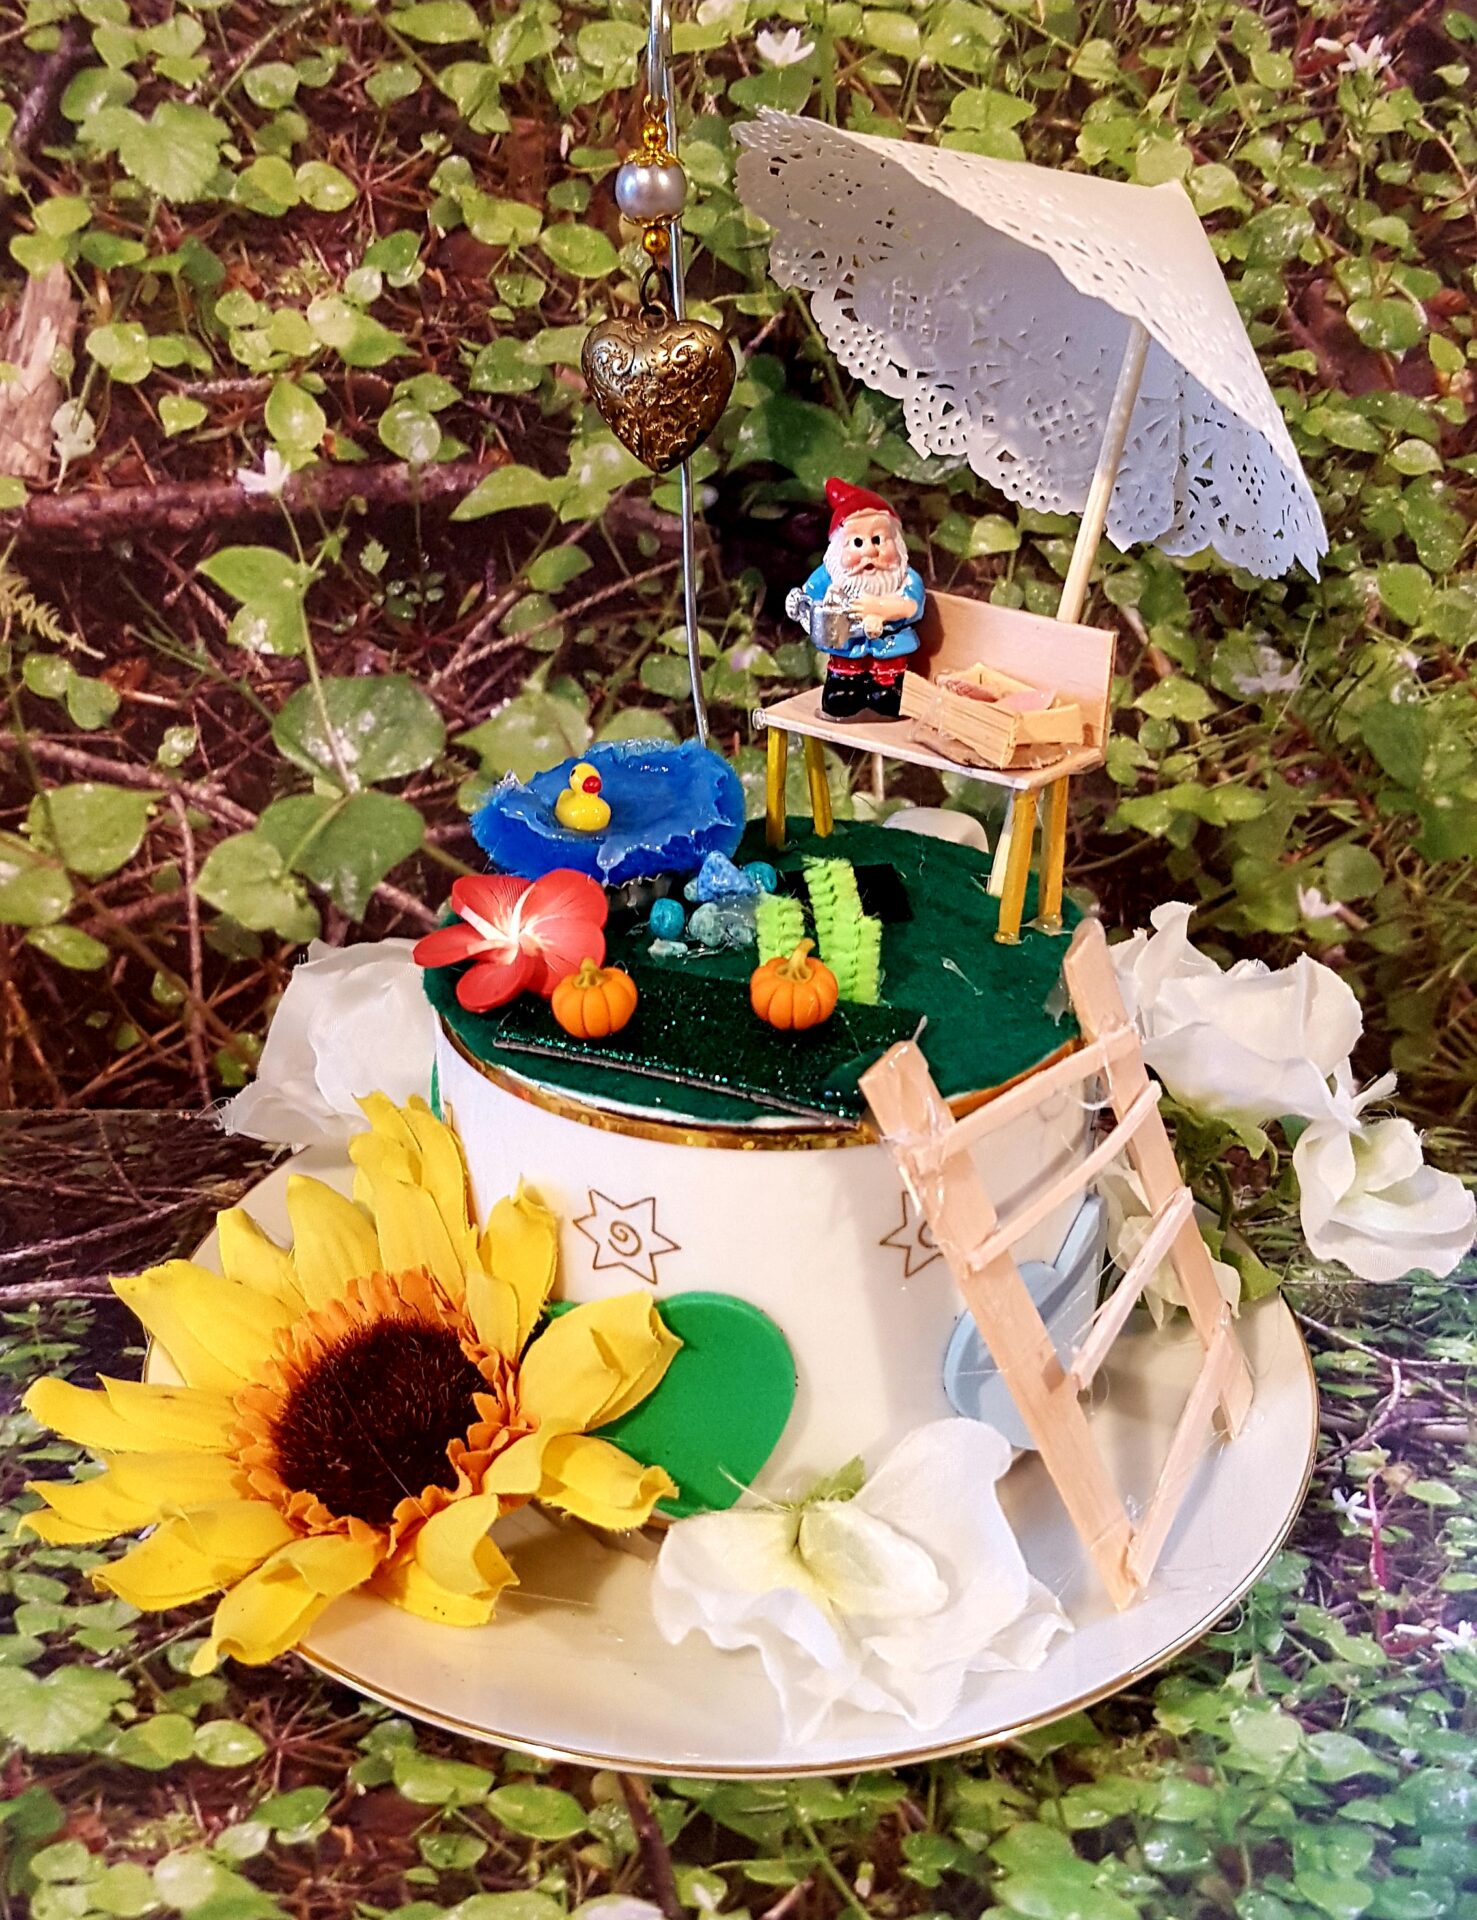 Image of Teacup Fun – Using Faux Flowers Create a Fairys garden, Mermaid cove or Dragons lair event